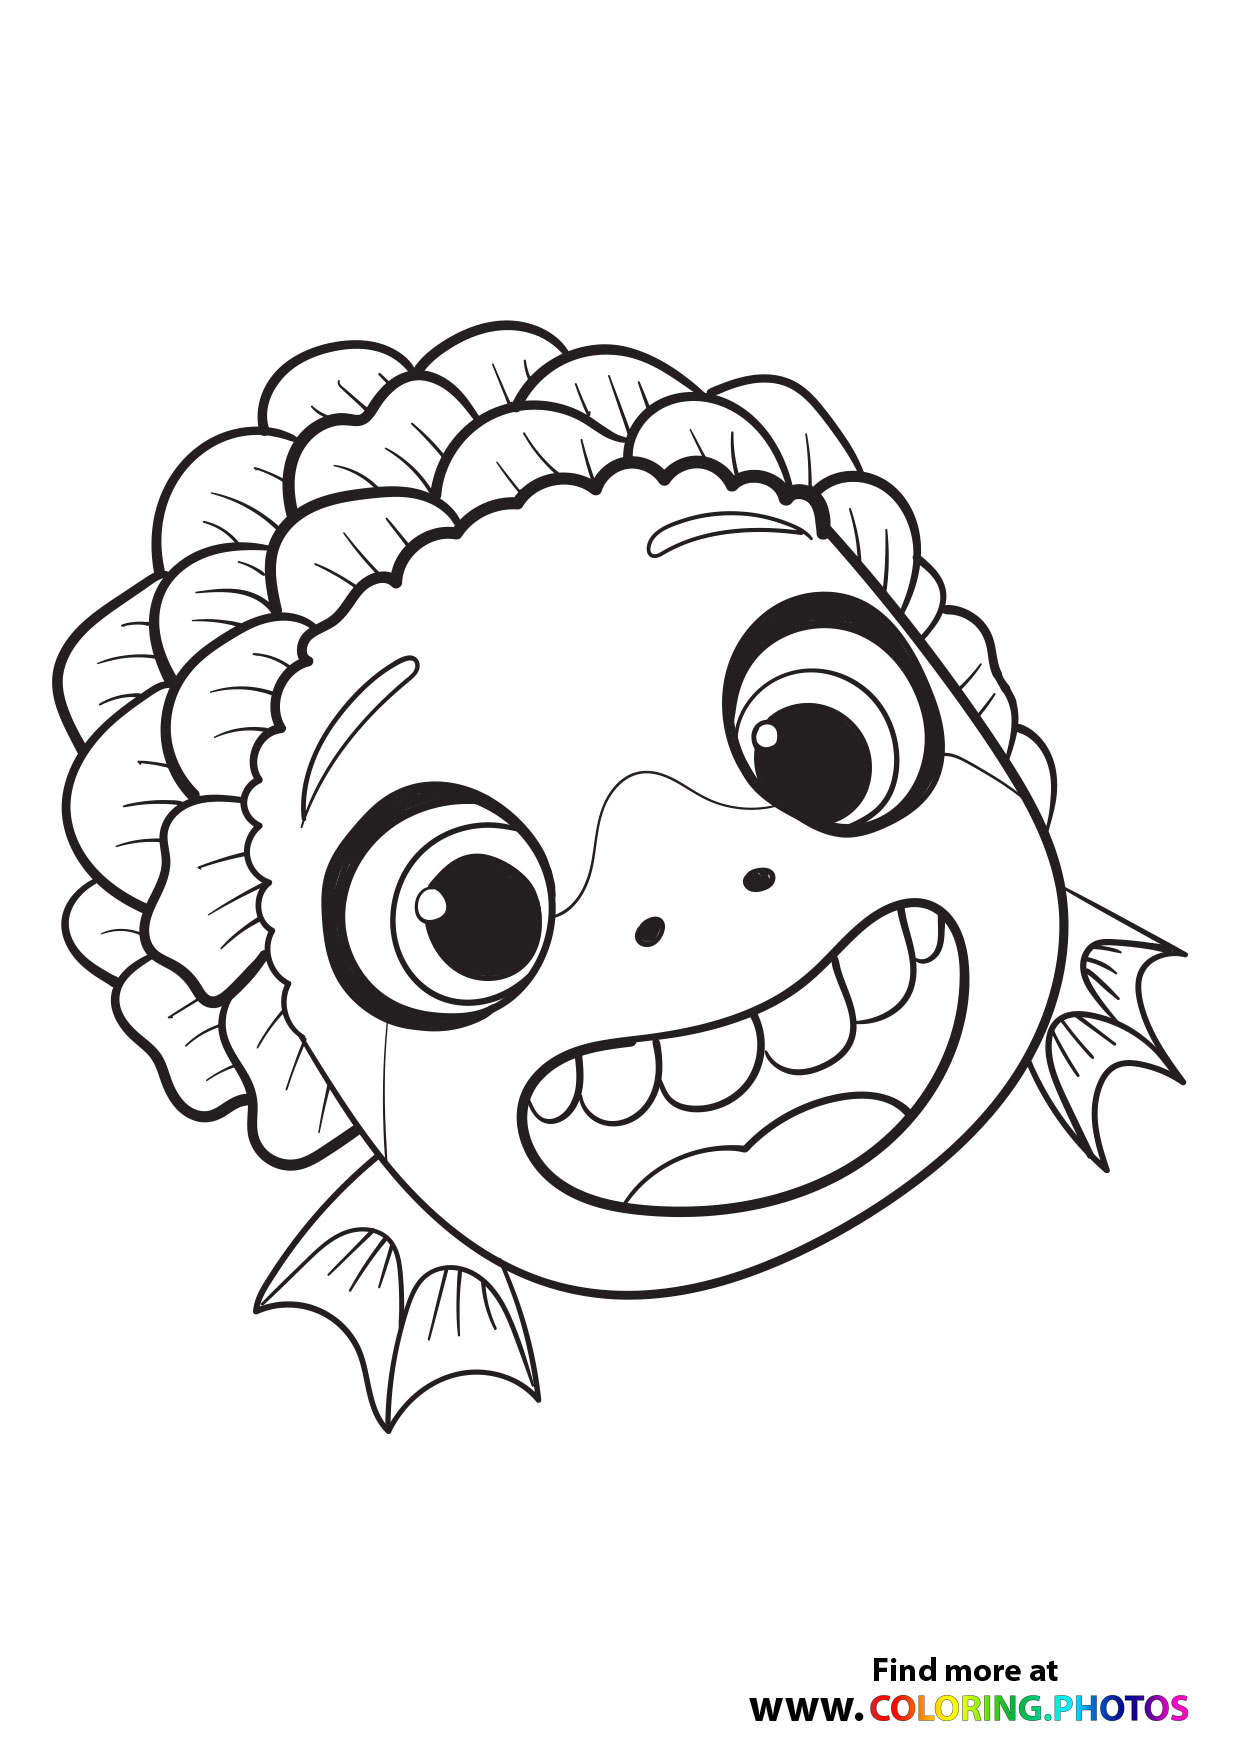 Mirabel Madrigal - Encanto - Coloring Pages for kids